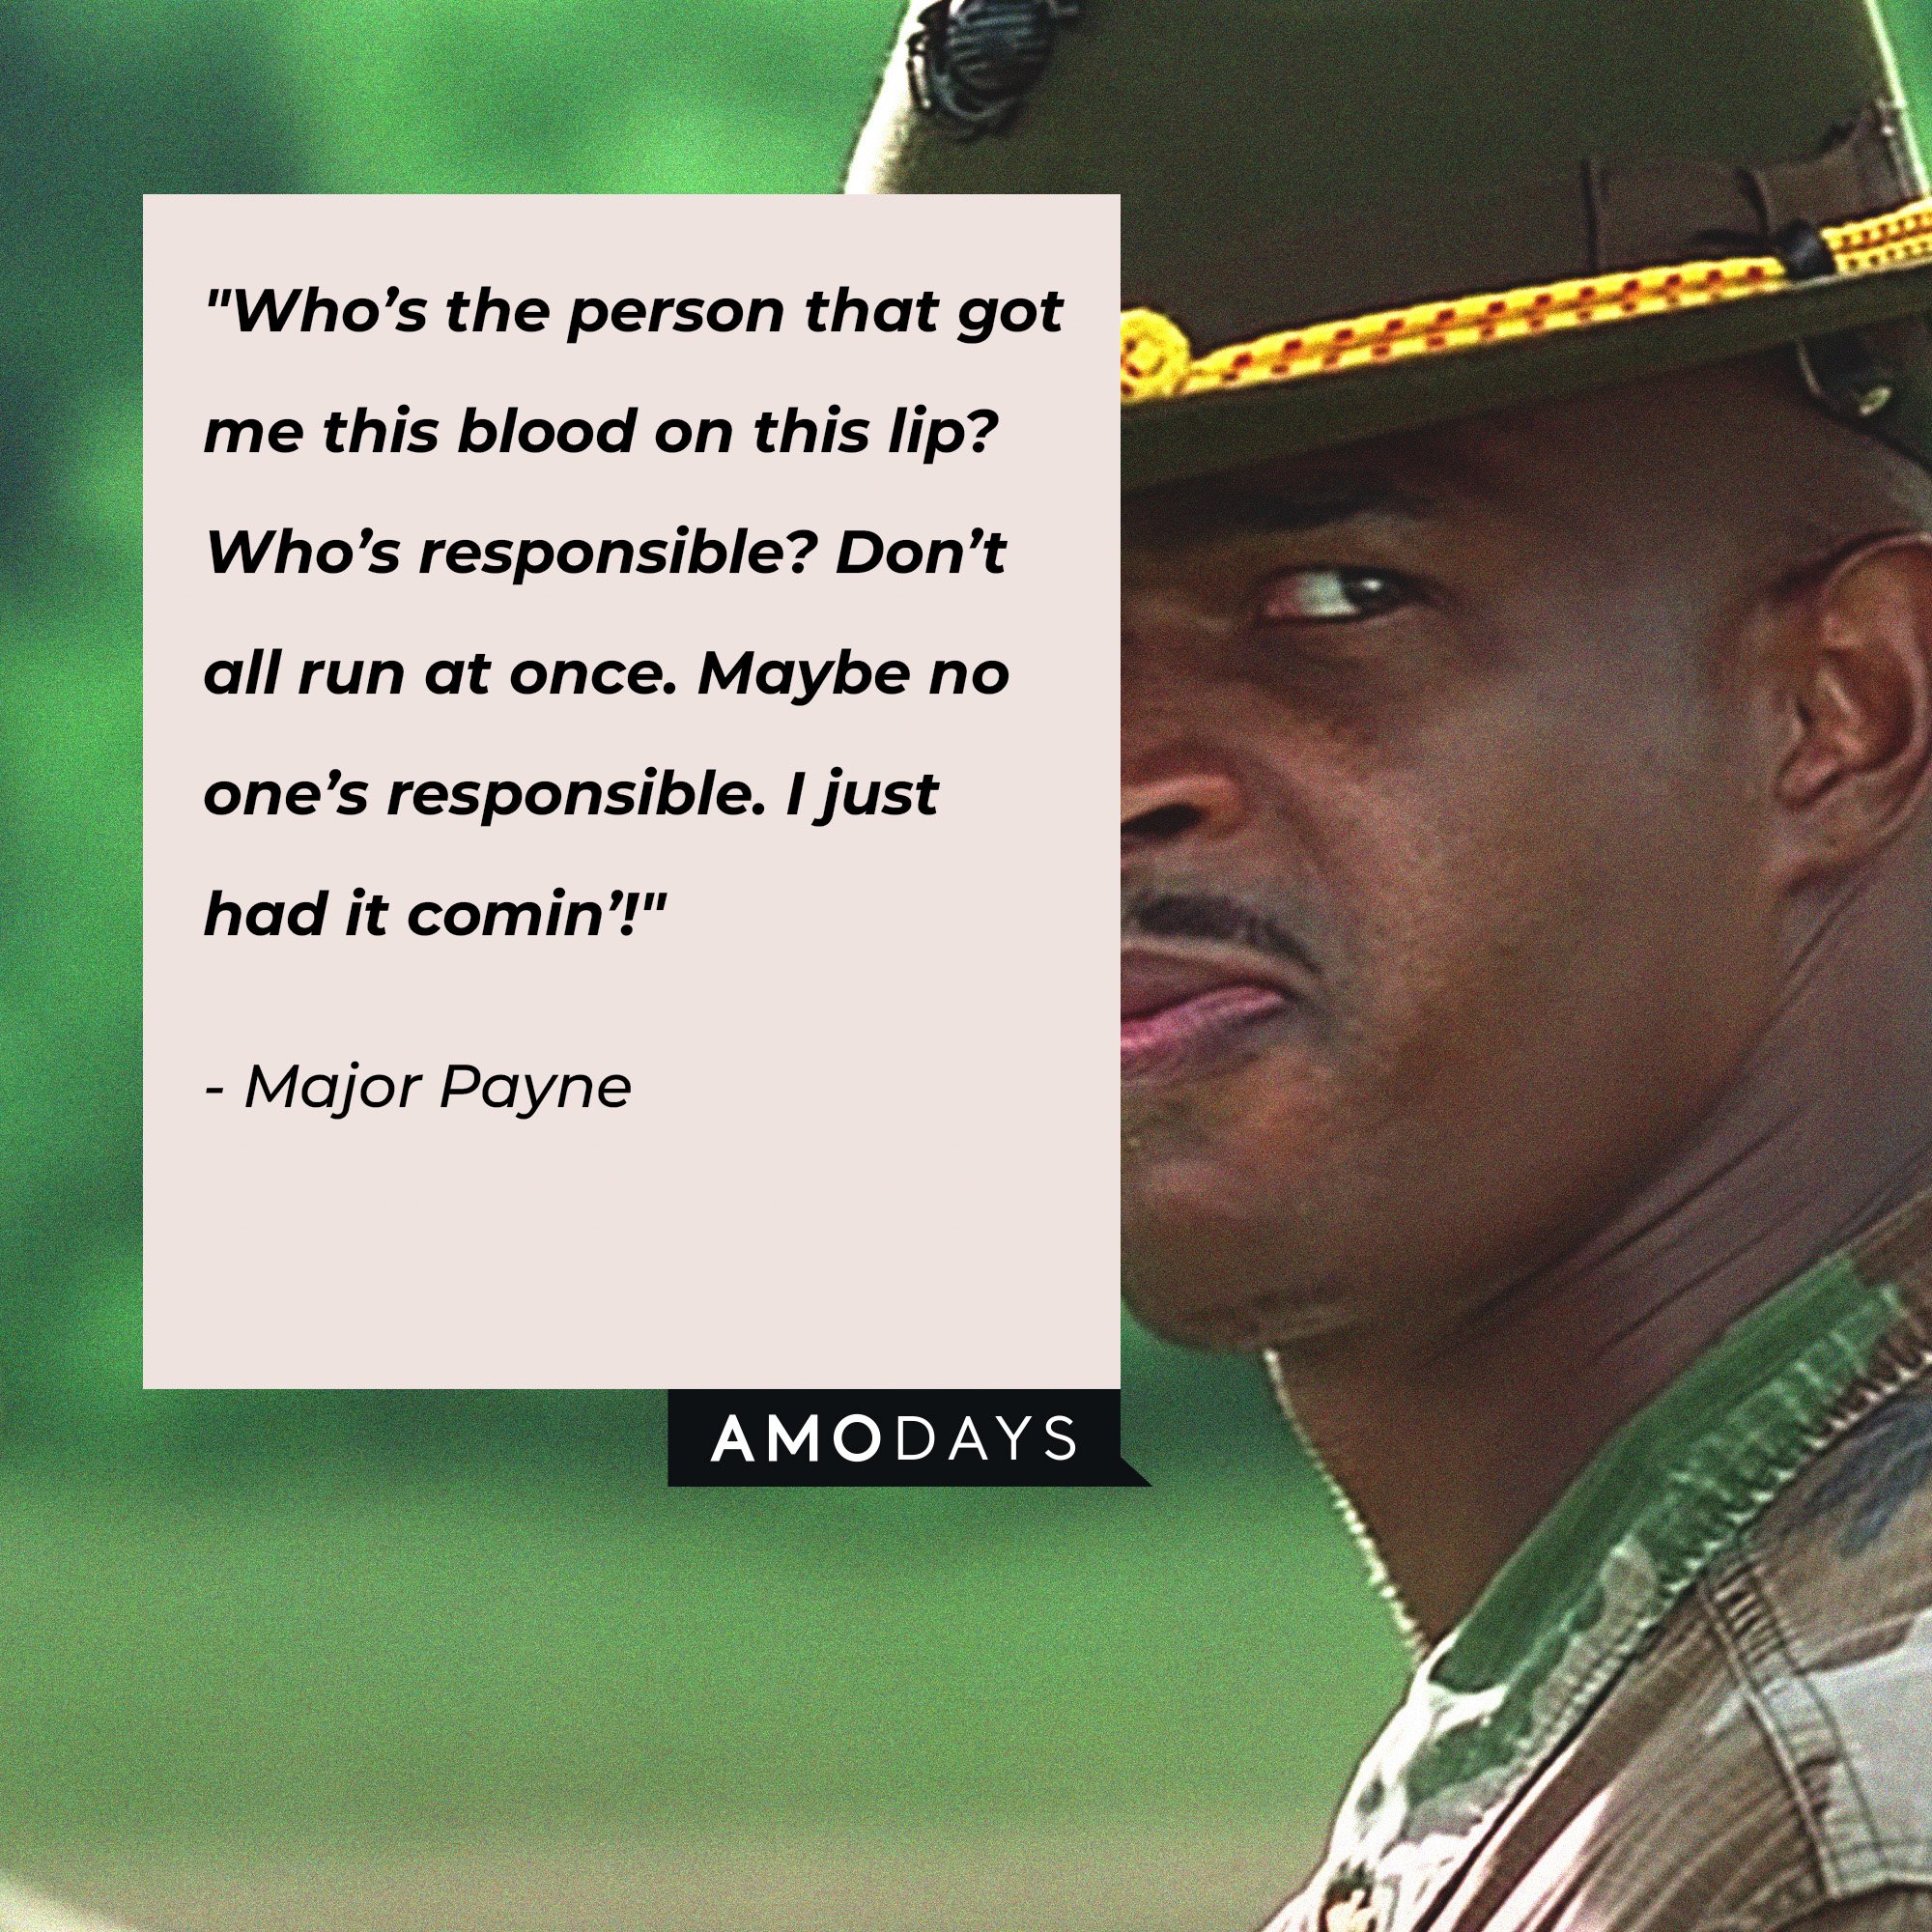 Major Payne's quote: "Who's the person that got me this blood on this lip? Who's responsible? Don't all run at once. Maybe no one's responsible. I just had it comin'!" | Source: Amodays